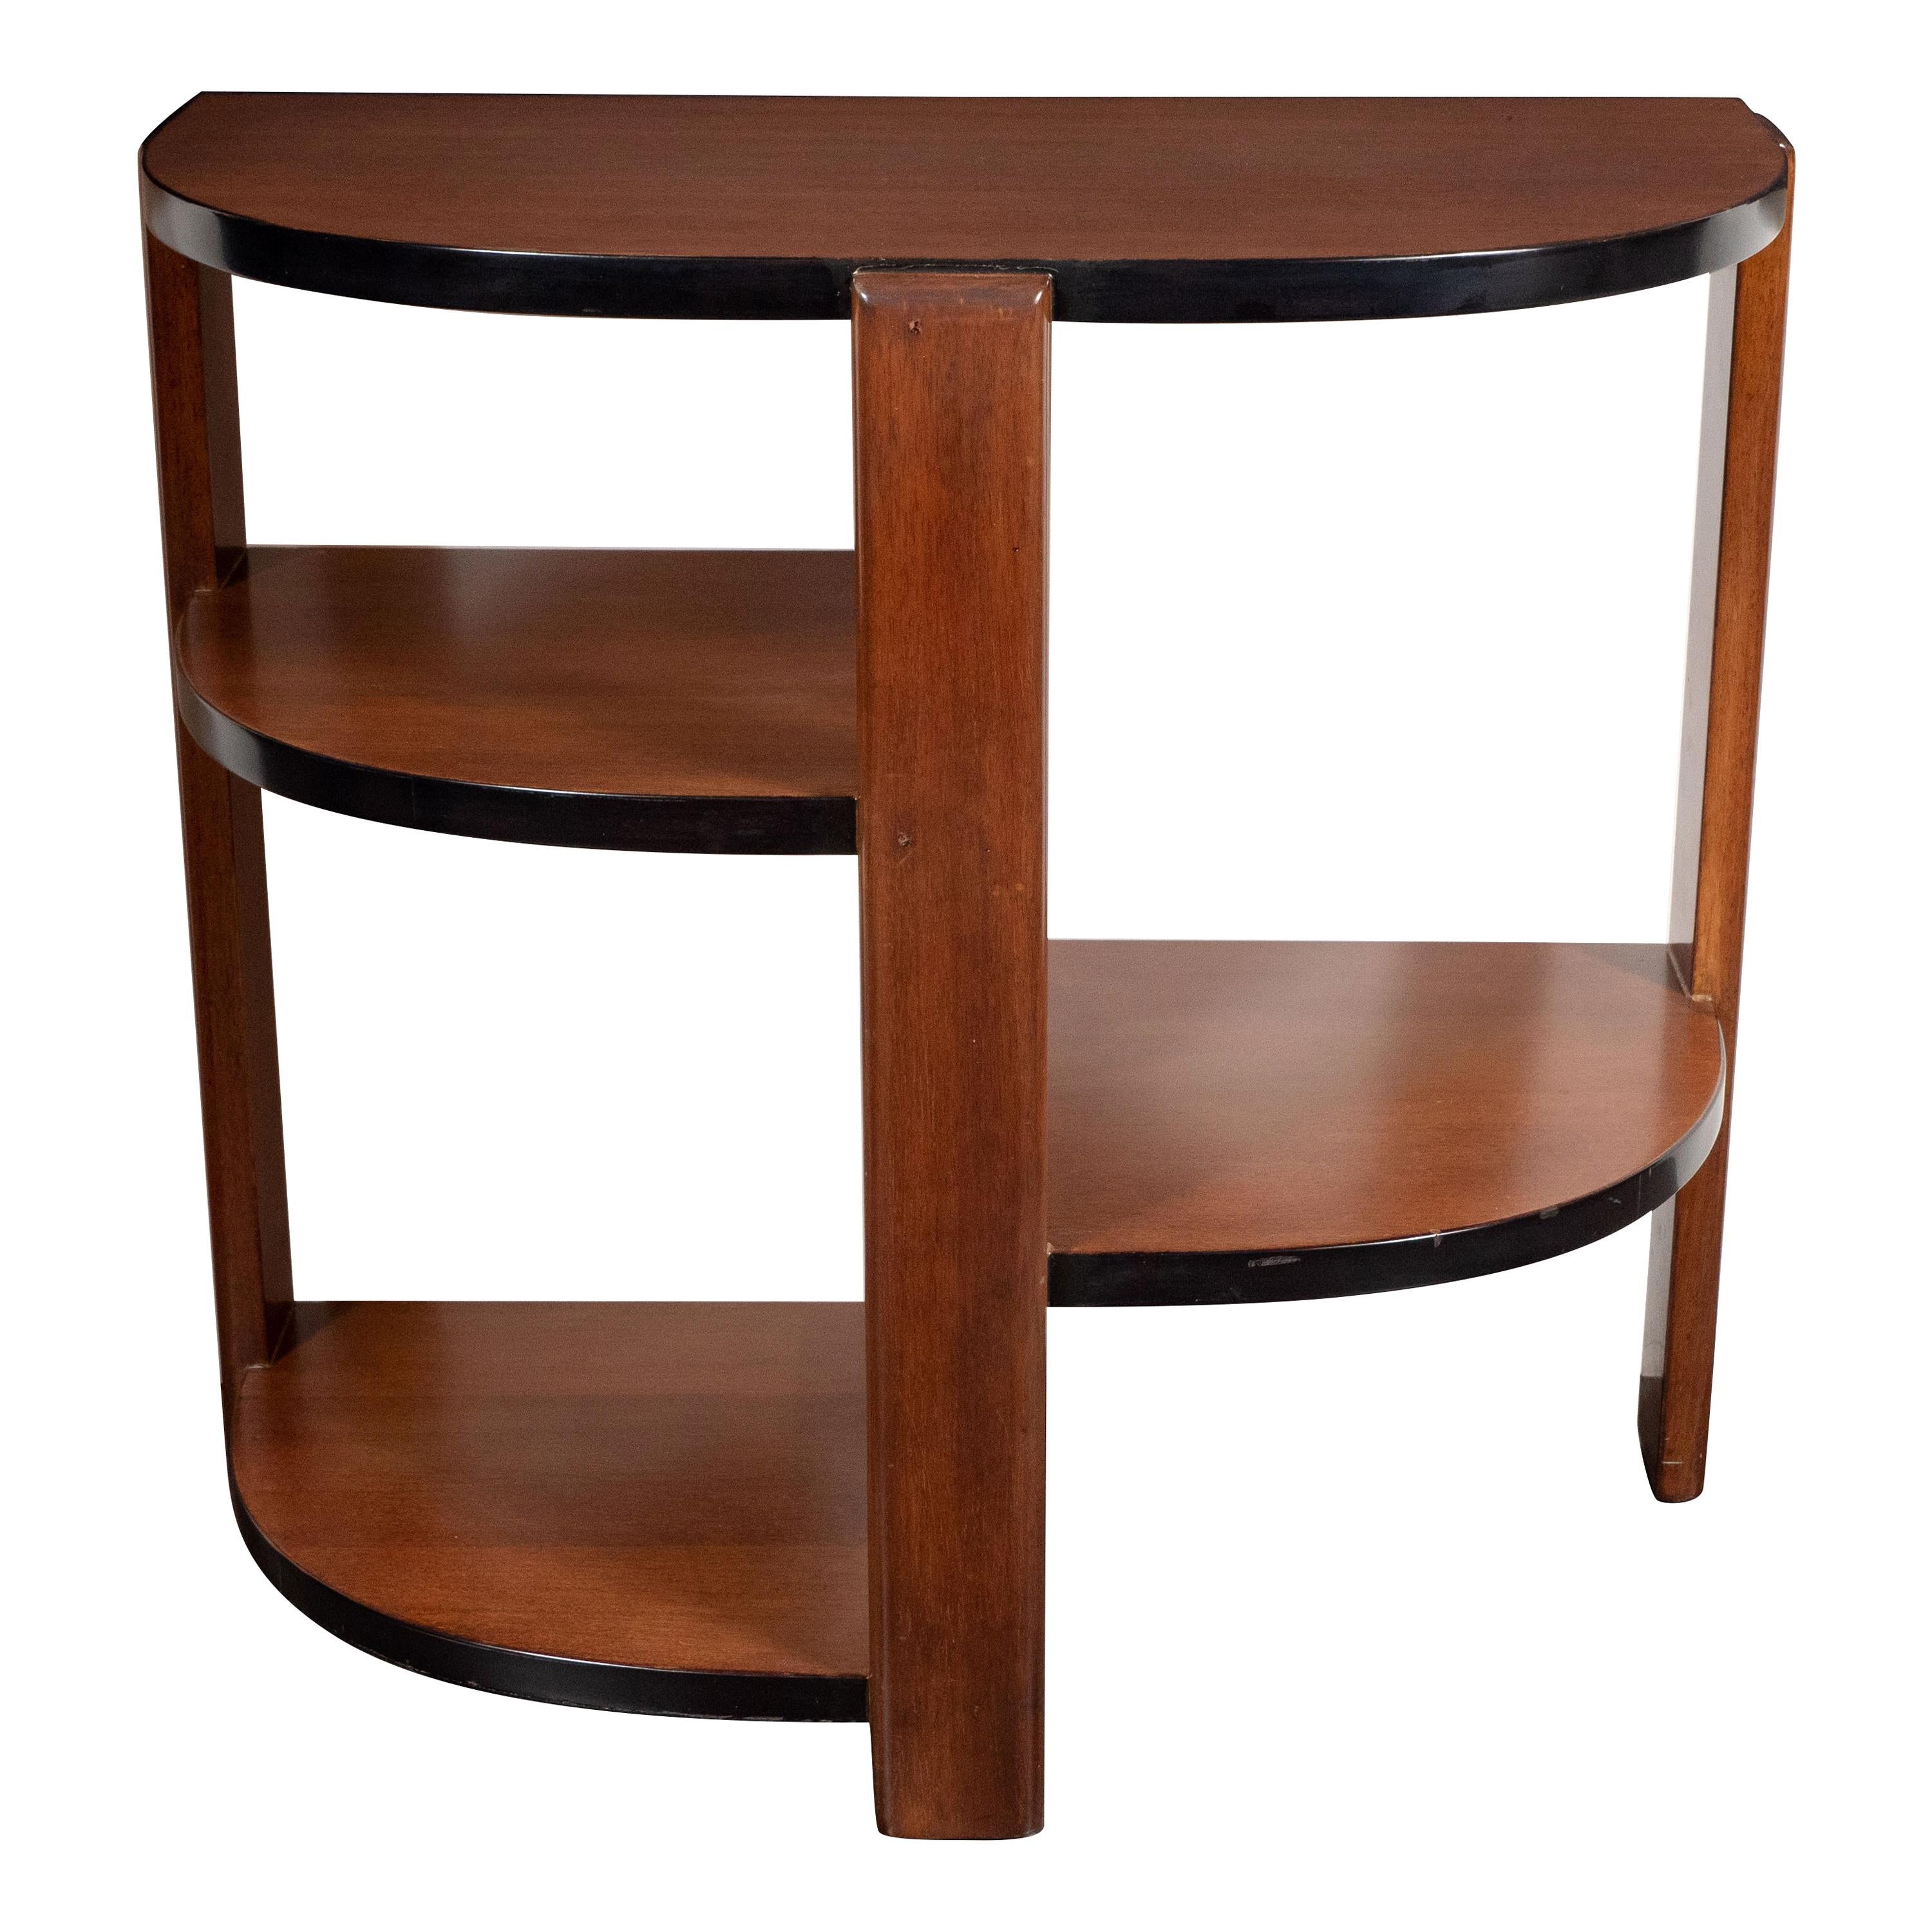 Art Deco Machine Age Bookmatched Walnut & Black Lacquer 4-Tier End/Side Table